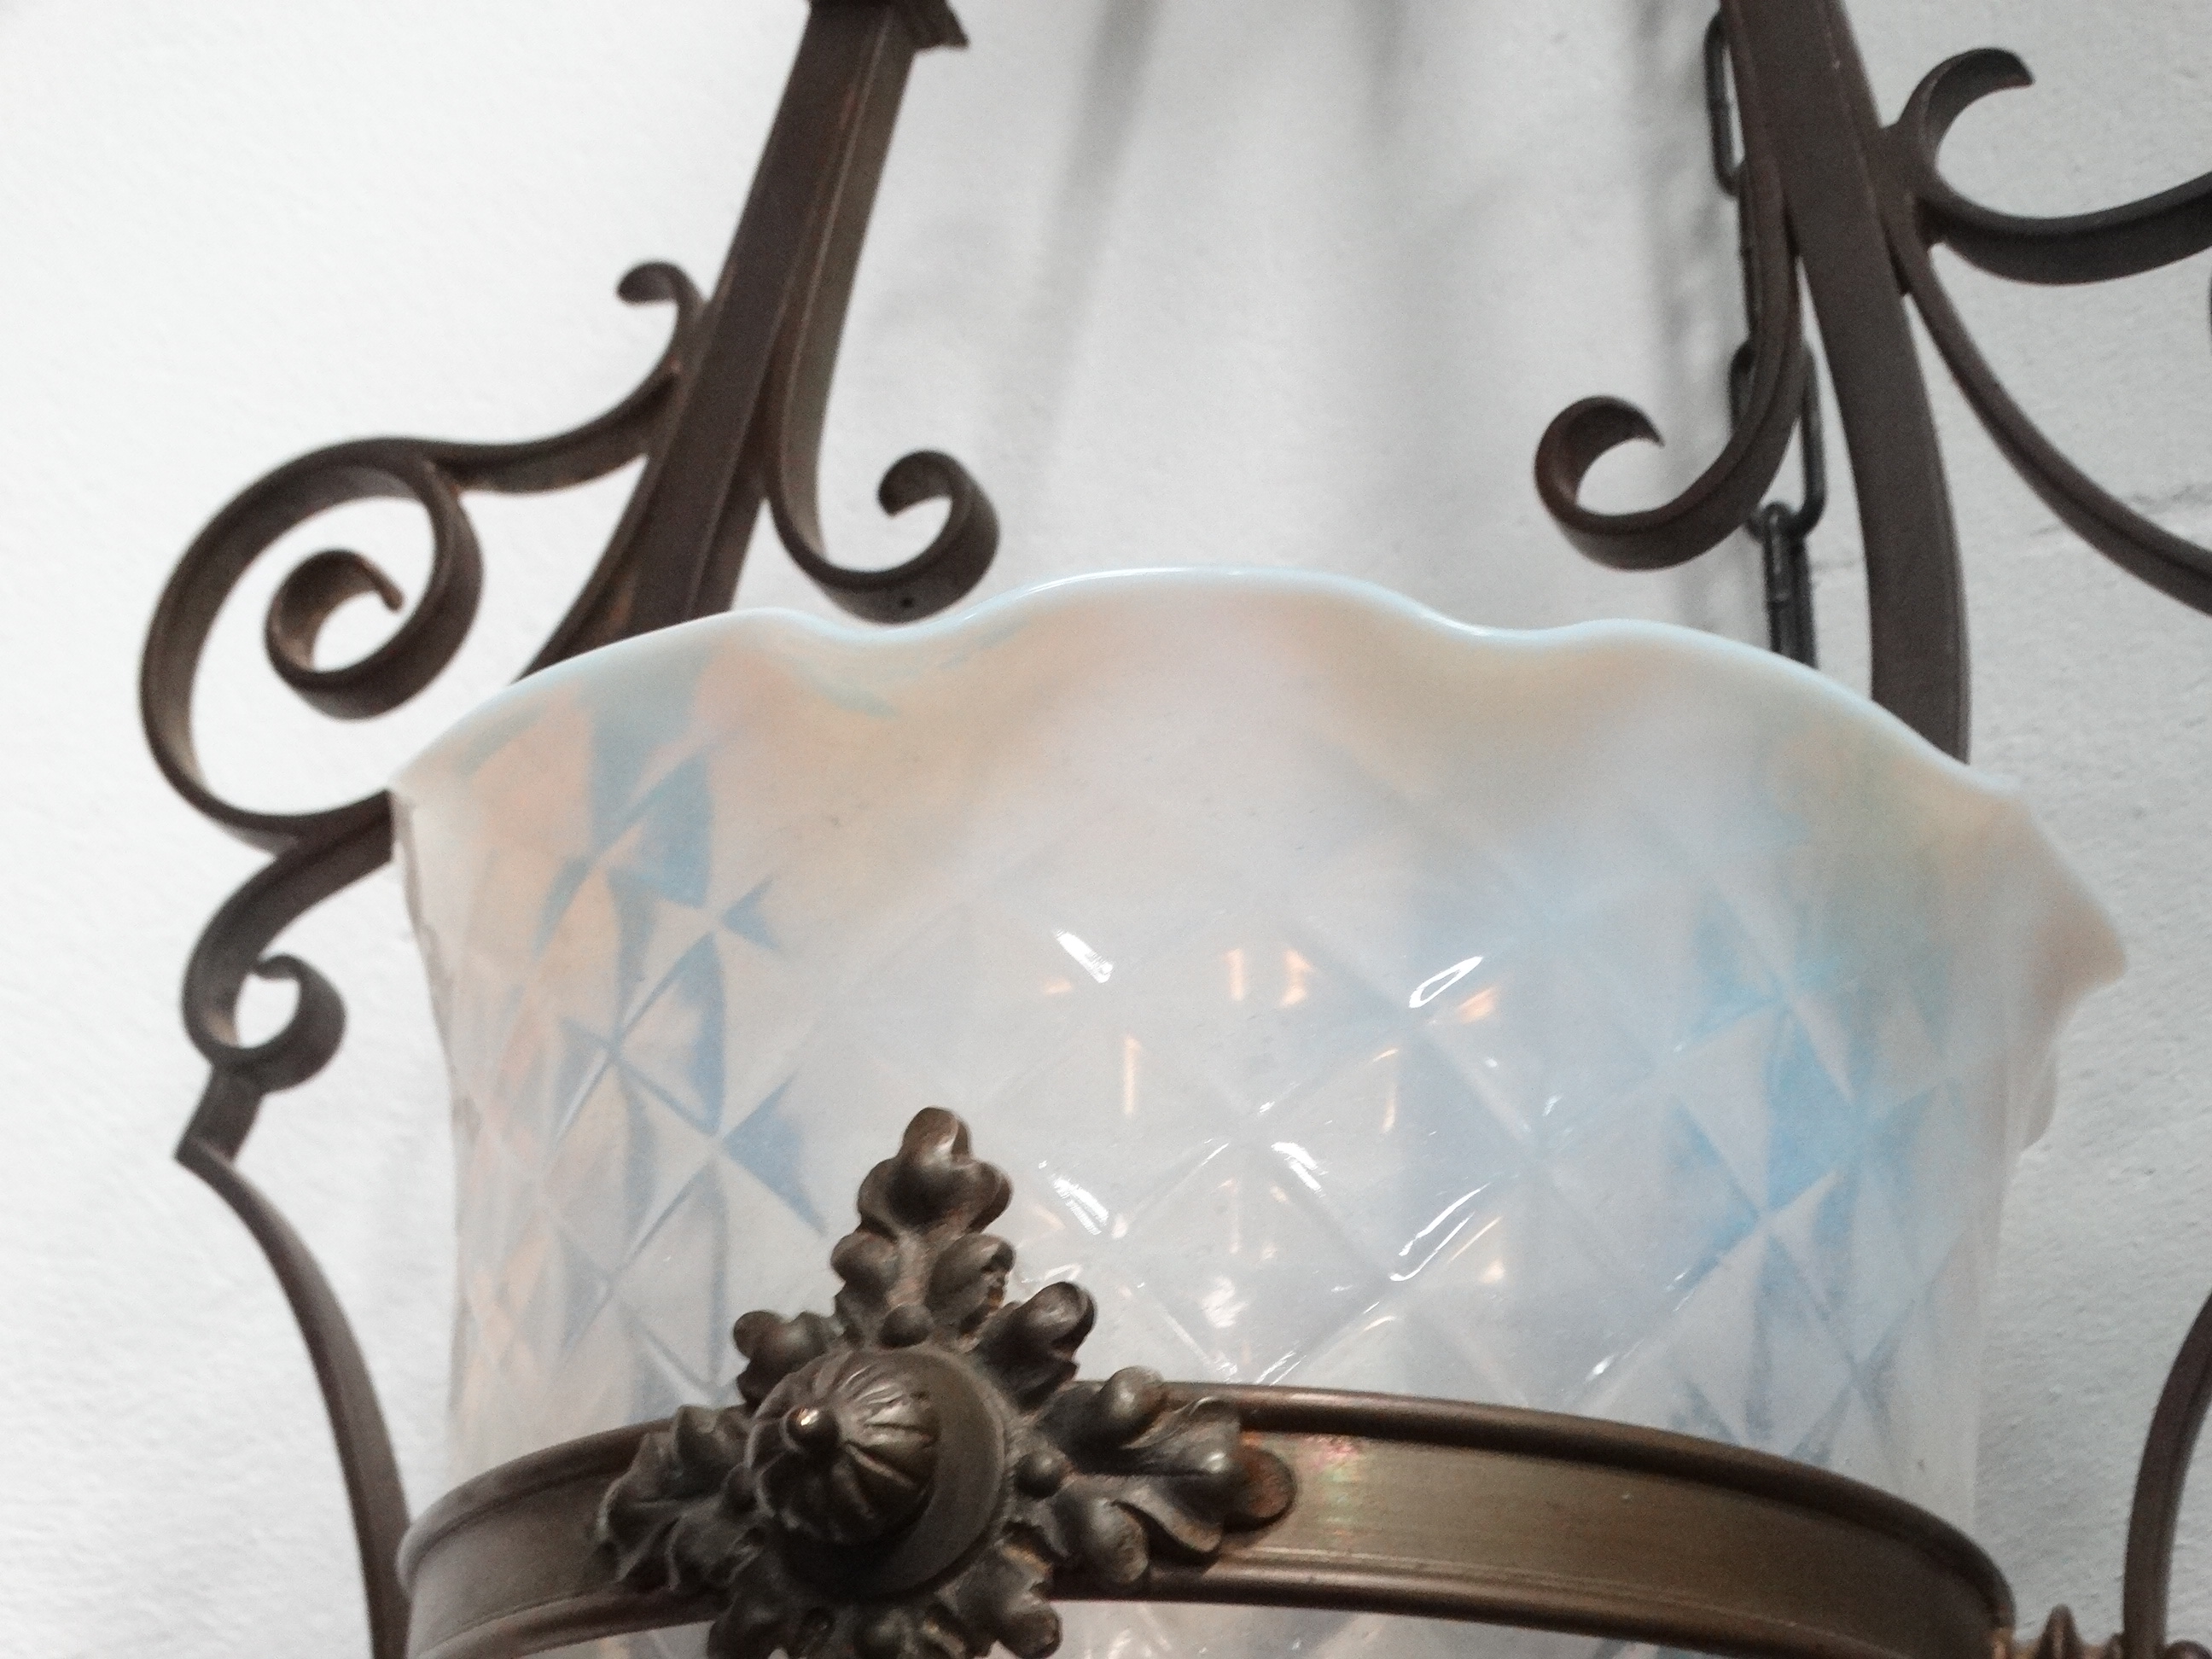 19th century vaseline glass and brass pendant light - An ornate light fitting with large dappled - Image 6 of 10